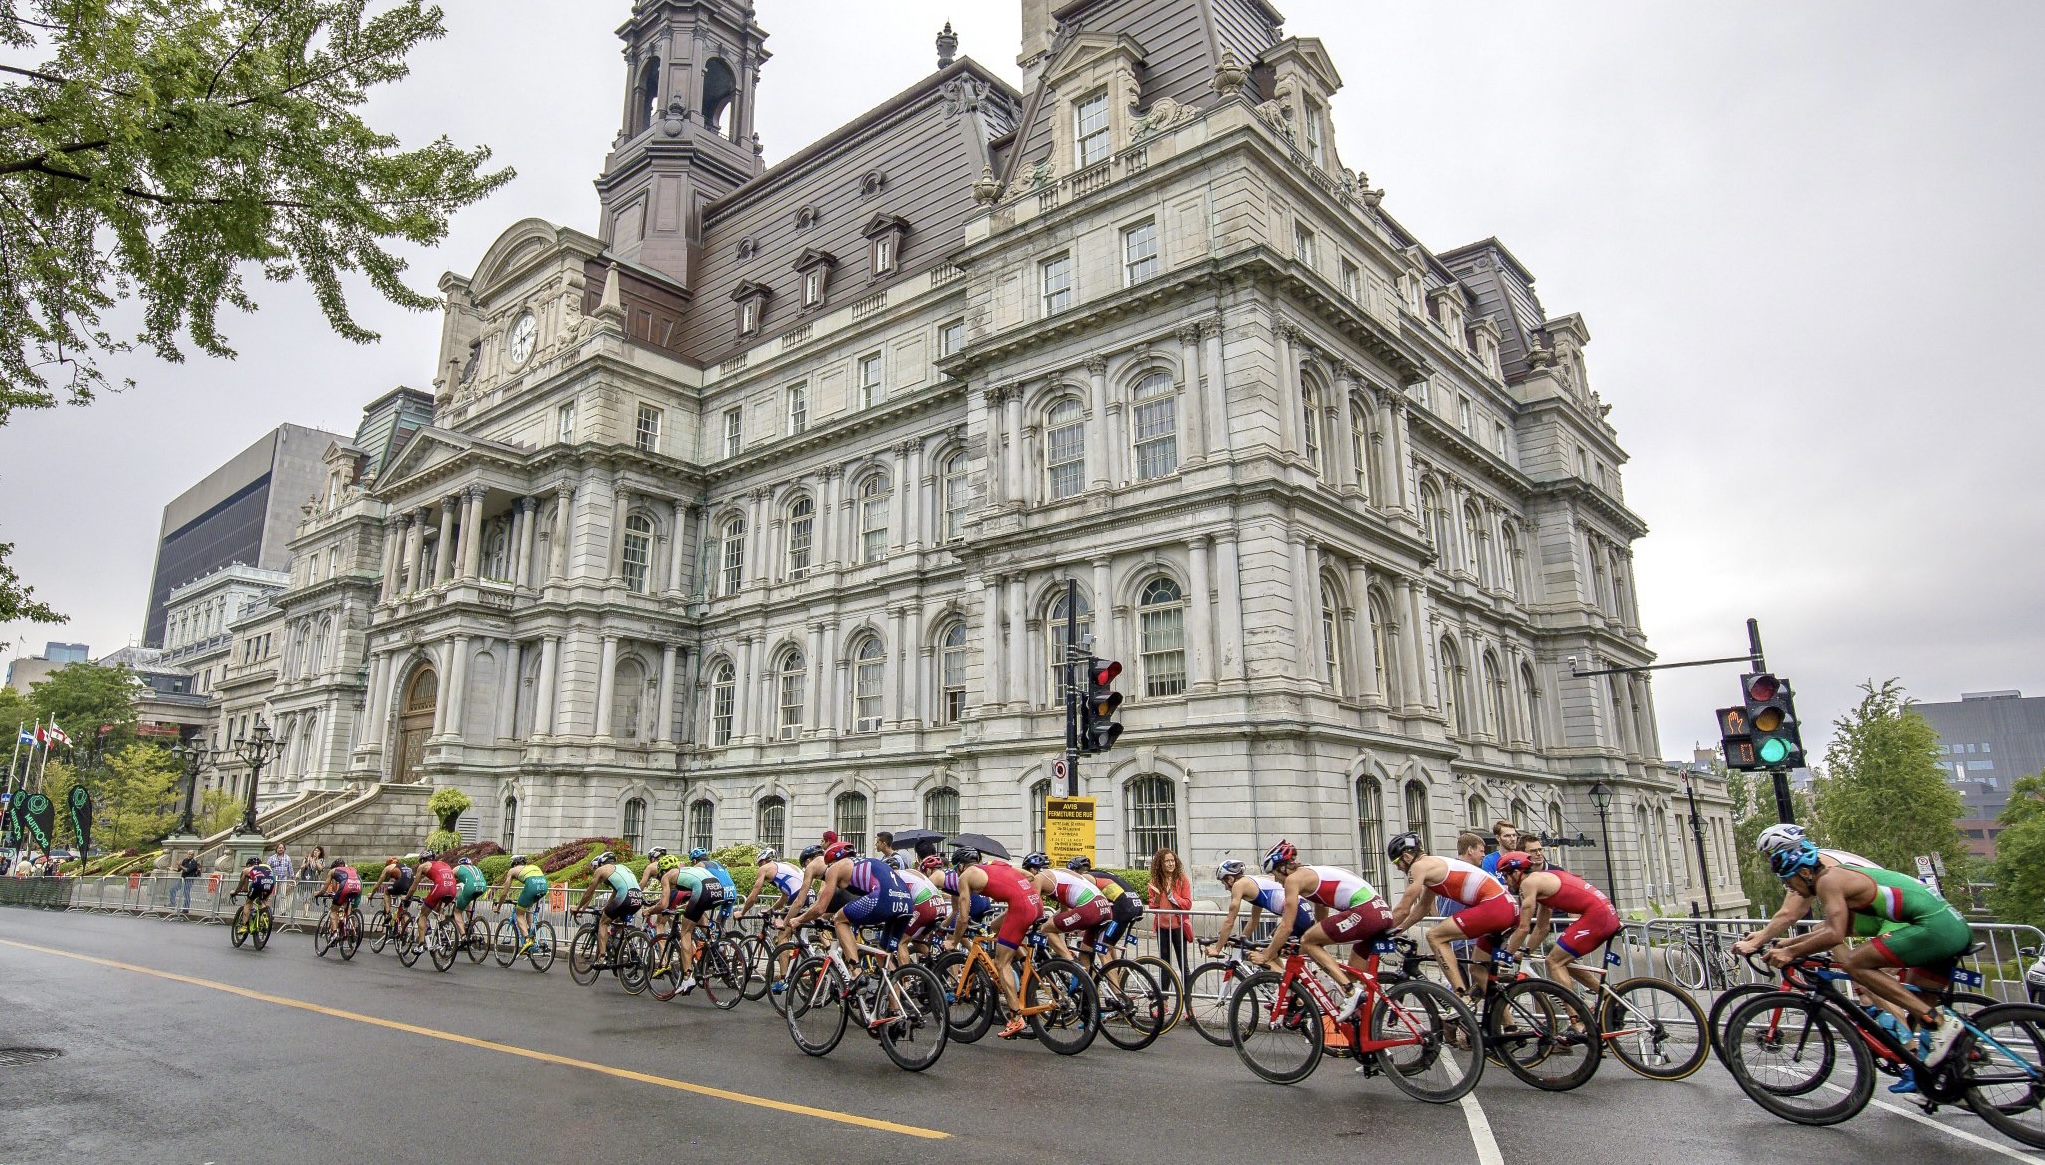 Montreal to host the 2022 World Triathlon Championships from June 22 to 26